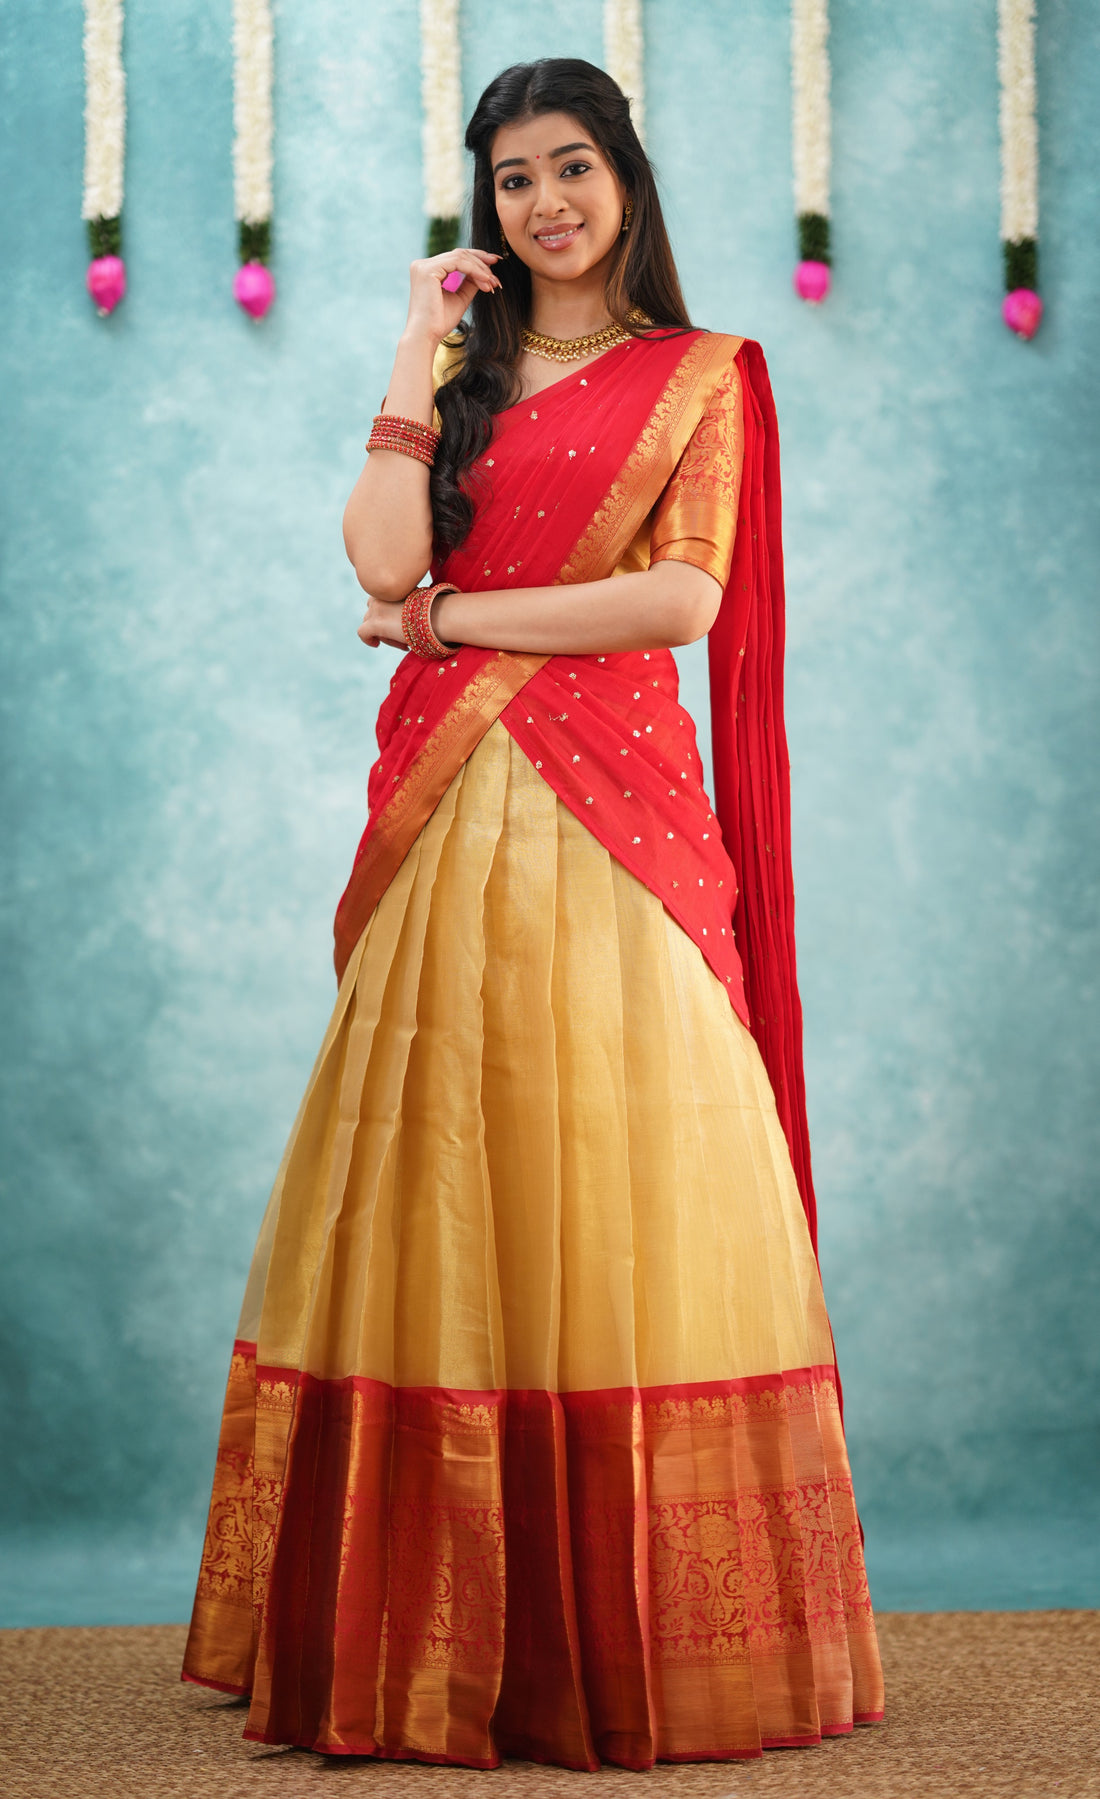 Izhaiyini Shade of Red and Gold tone Organza Halfsaree (Express Delivery)